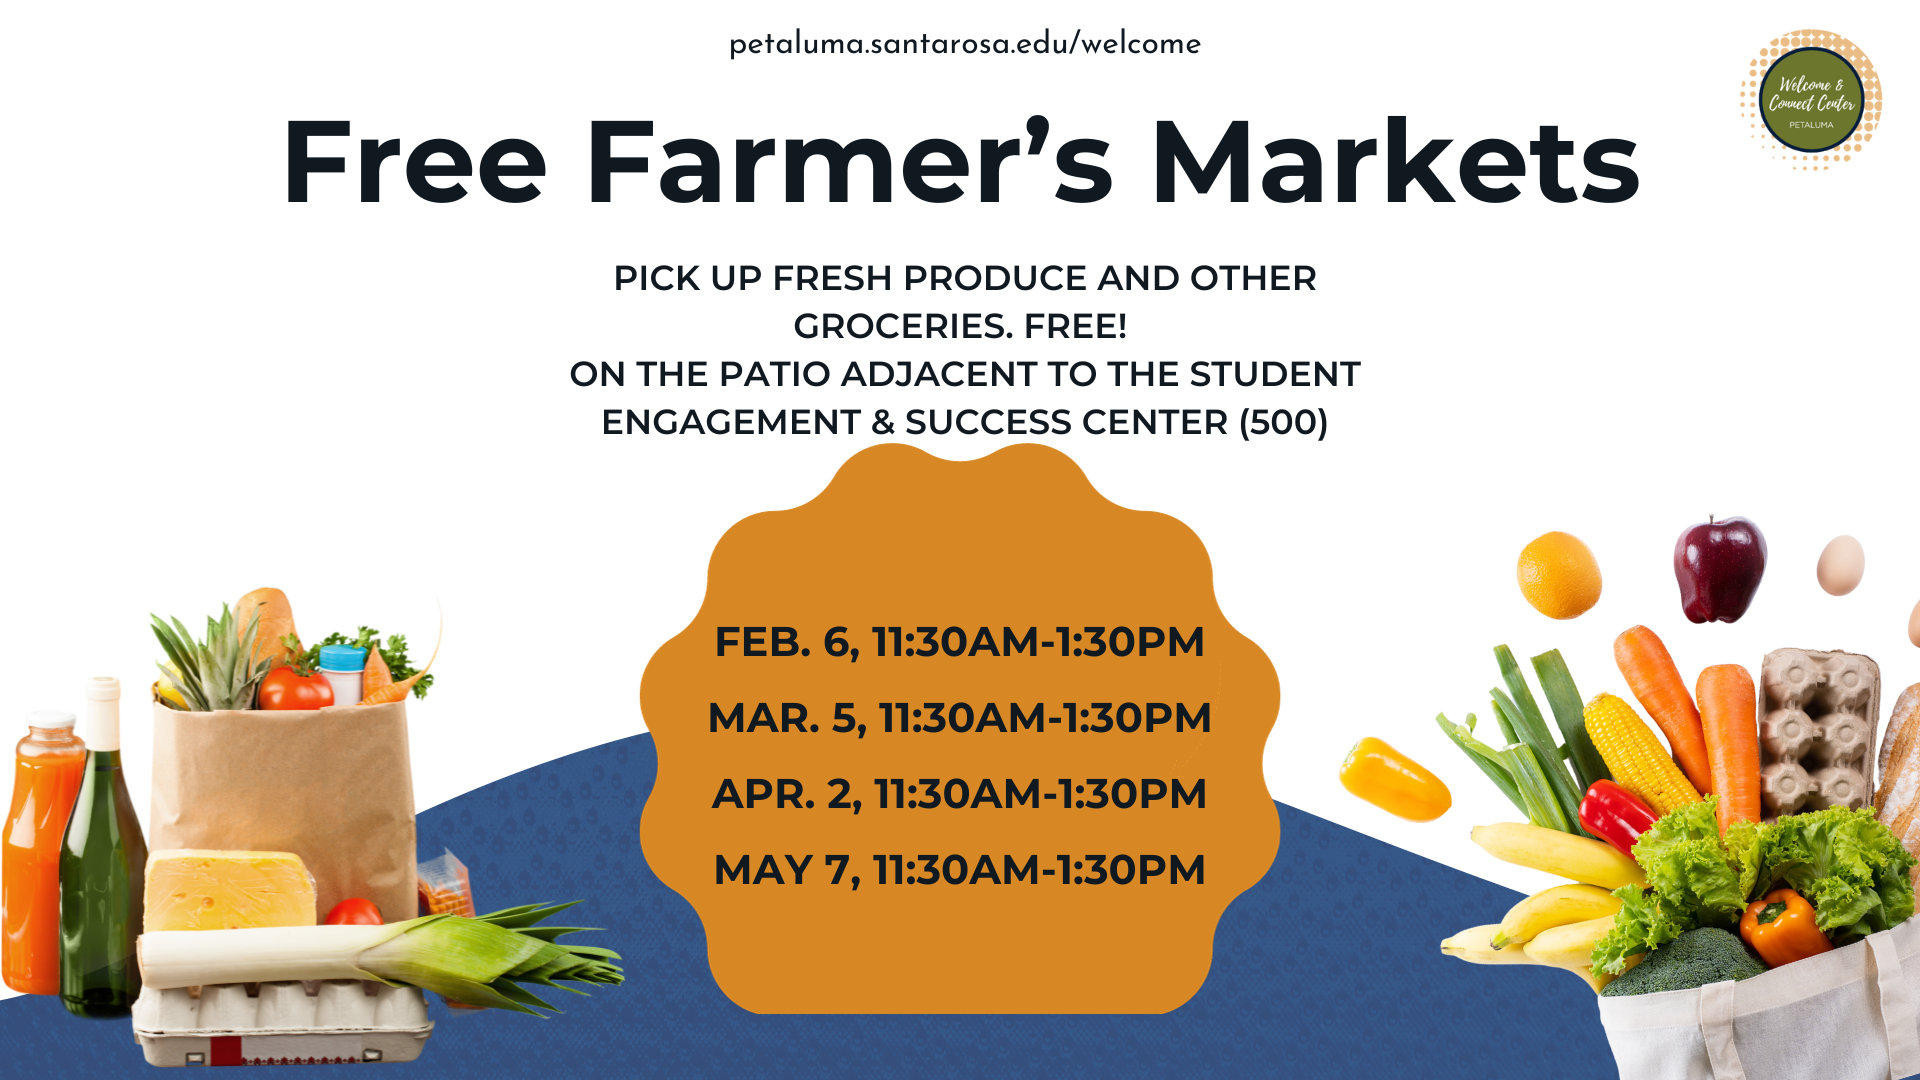 Free Framer's Markets Pick up fresh produce and other groceries. Free! On the patio adjacent to the Student Engagement & Success Center (500) FEB 6, MAR 5, APR 2, MAY 7 from 11:30am to 1:30pm petaluma.santarosa.edu/welcome